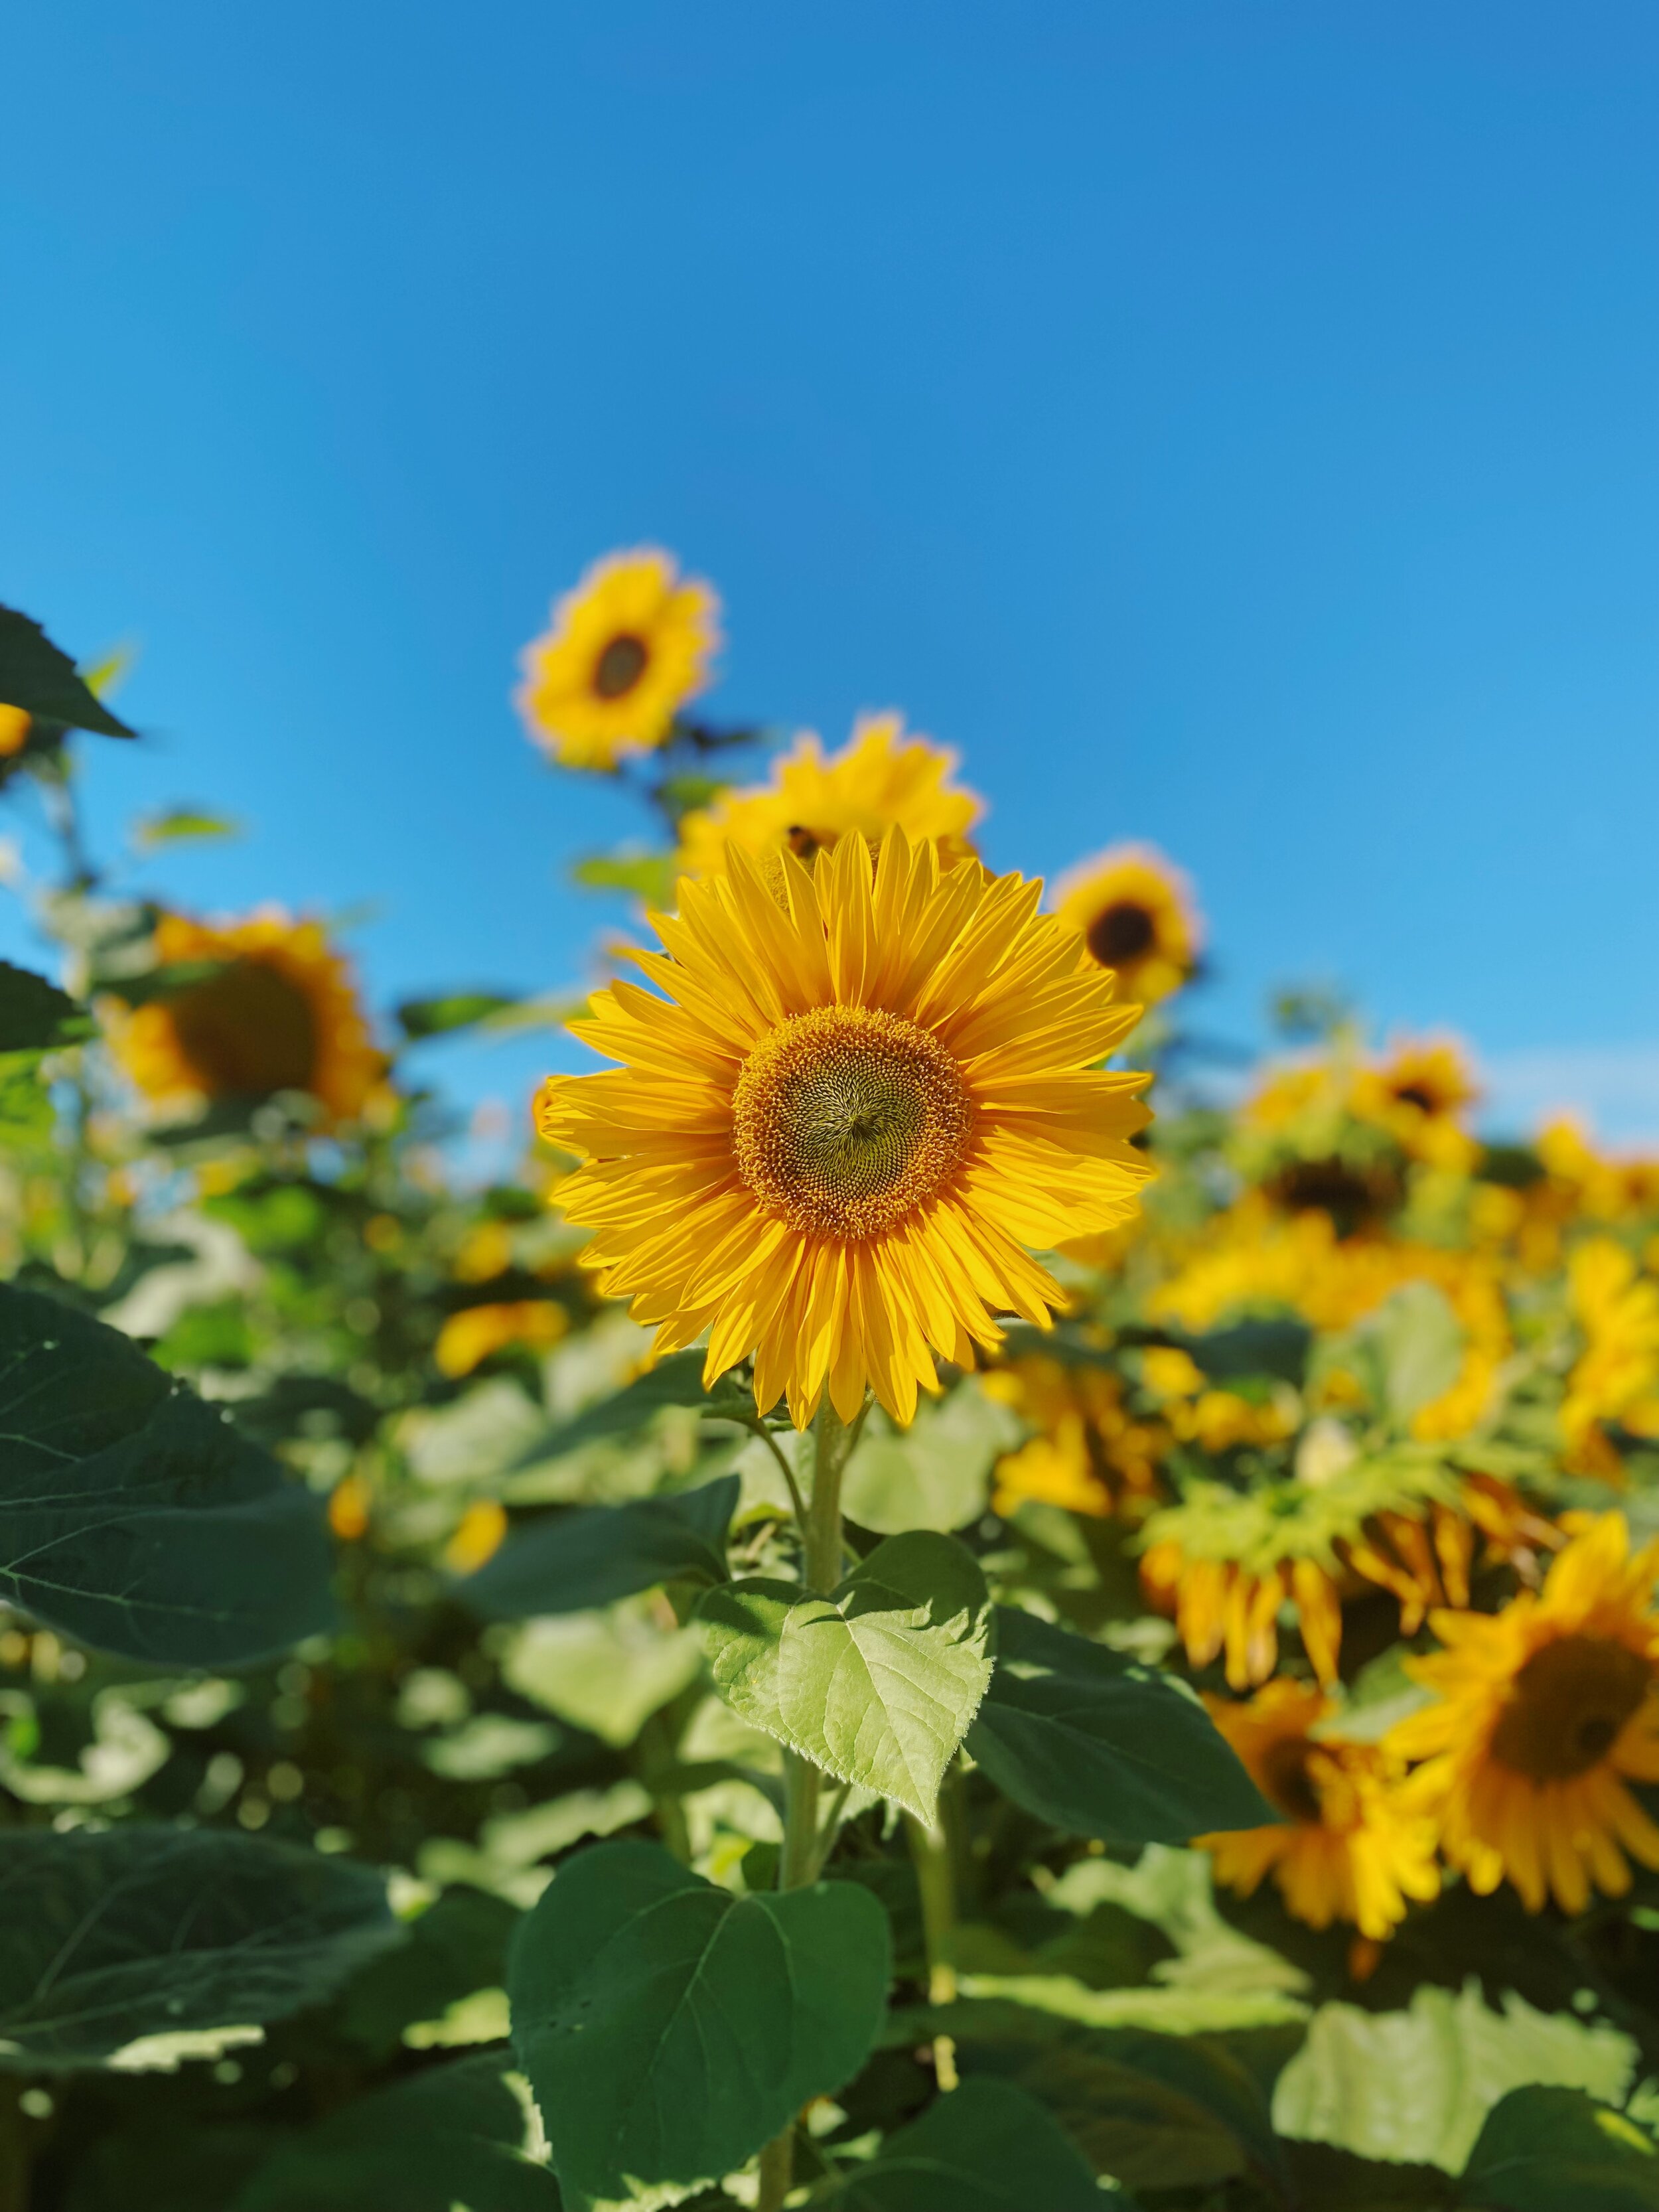  We were told that the farm grew over 20 different kinds of sunflowers this season— I had no idea that there  WERE  over 20 different kinds of sunflowers! 